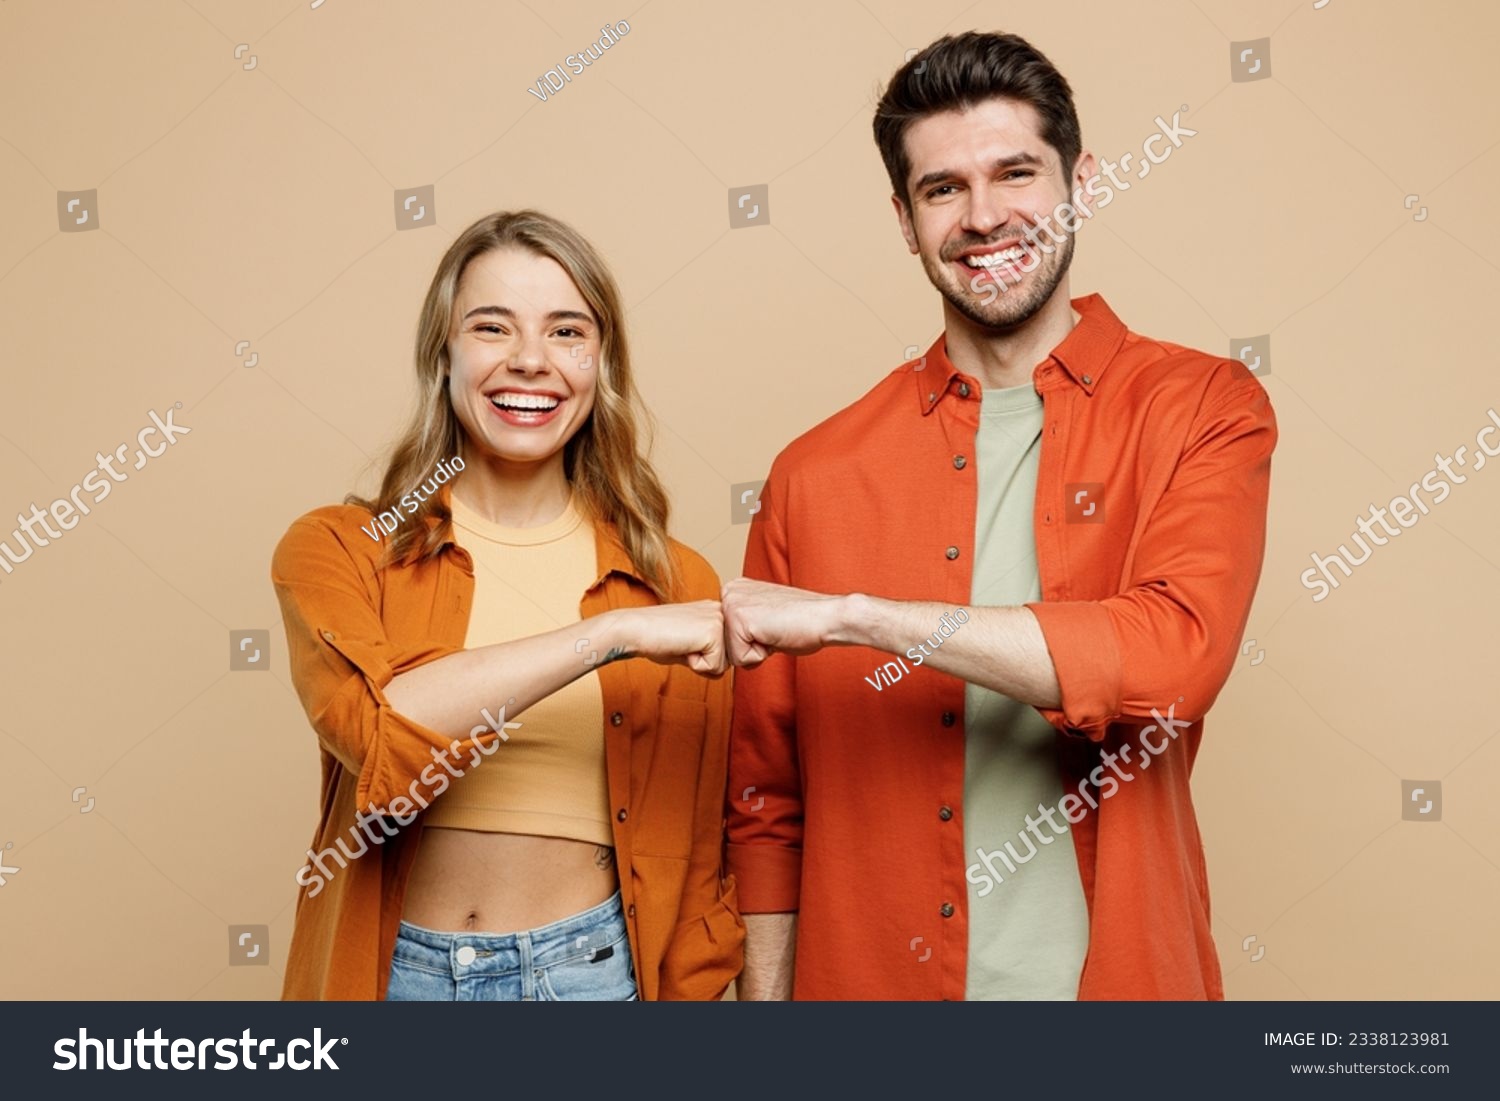 Young smiling happy buddies fun couple two friends family man woman wear casual clothes looking camera giving fist bumo together isolated on pastel plain light beige color background studio portrait #2338123981